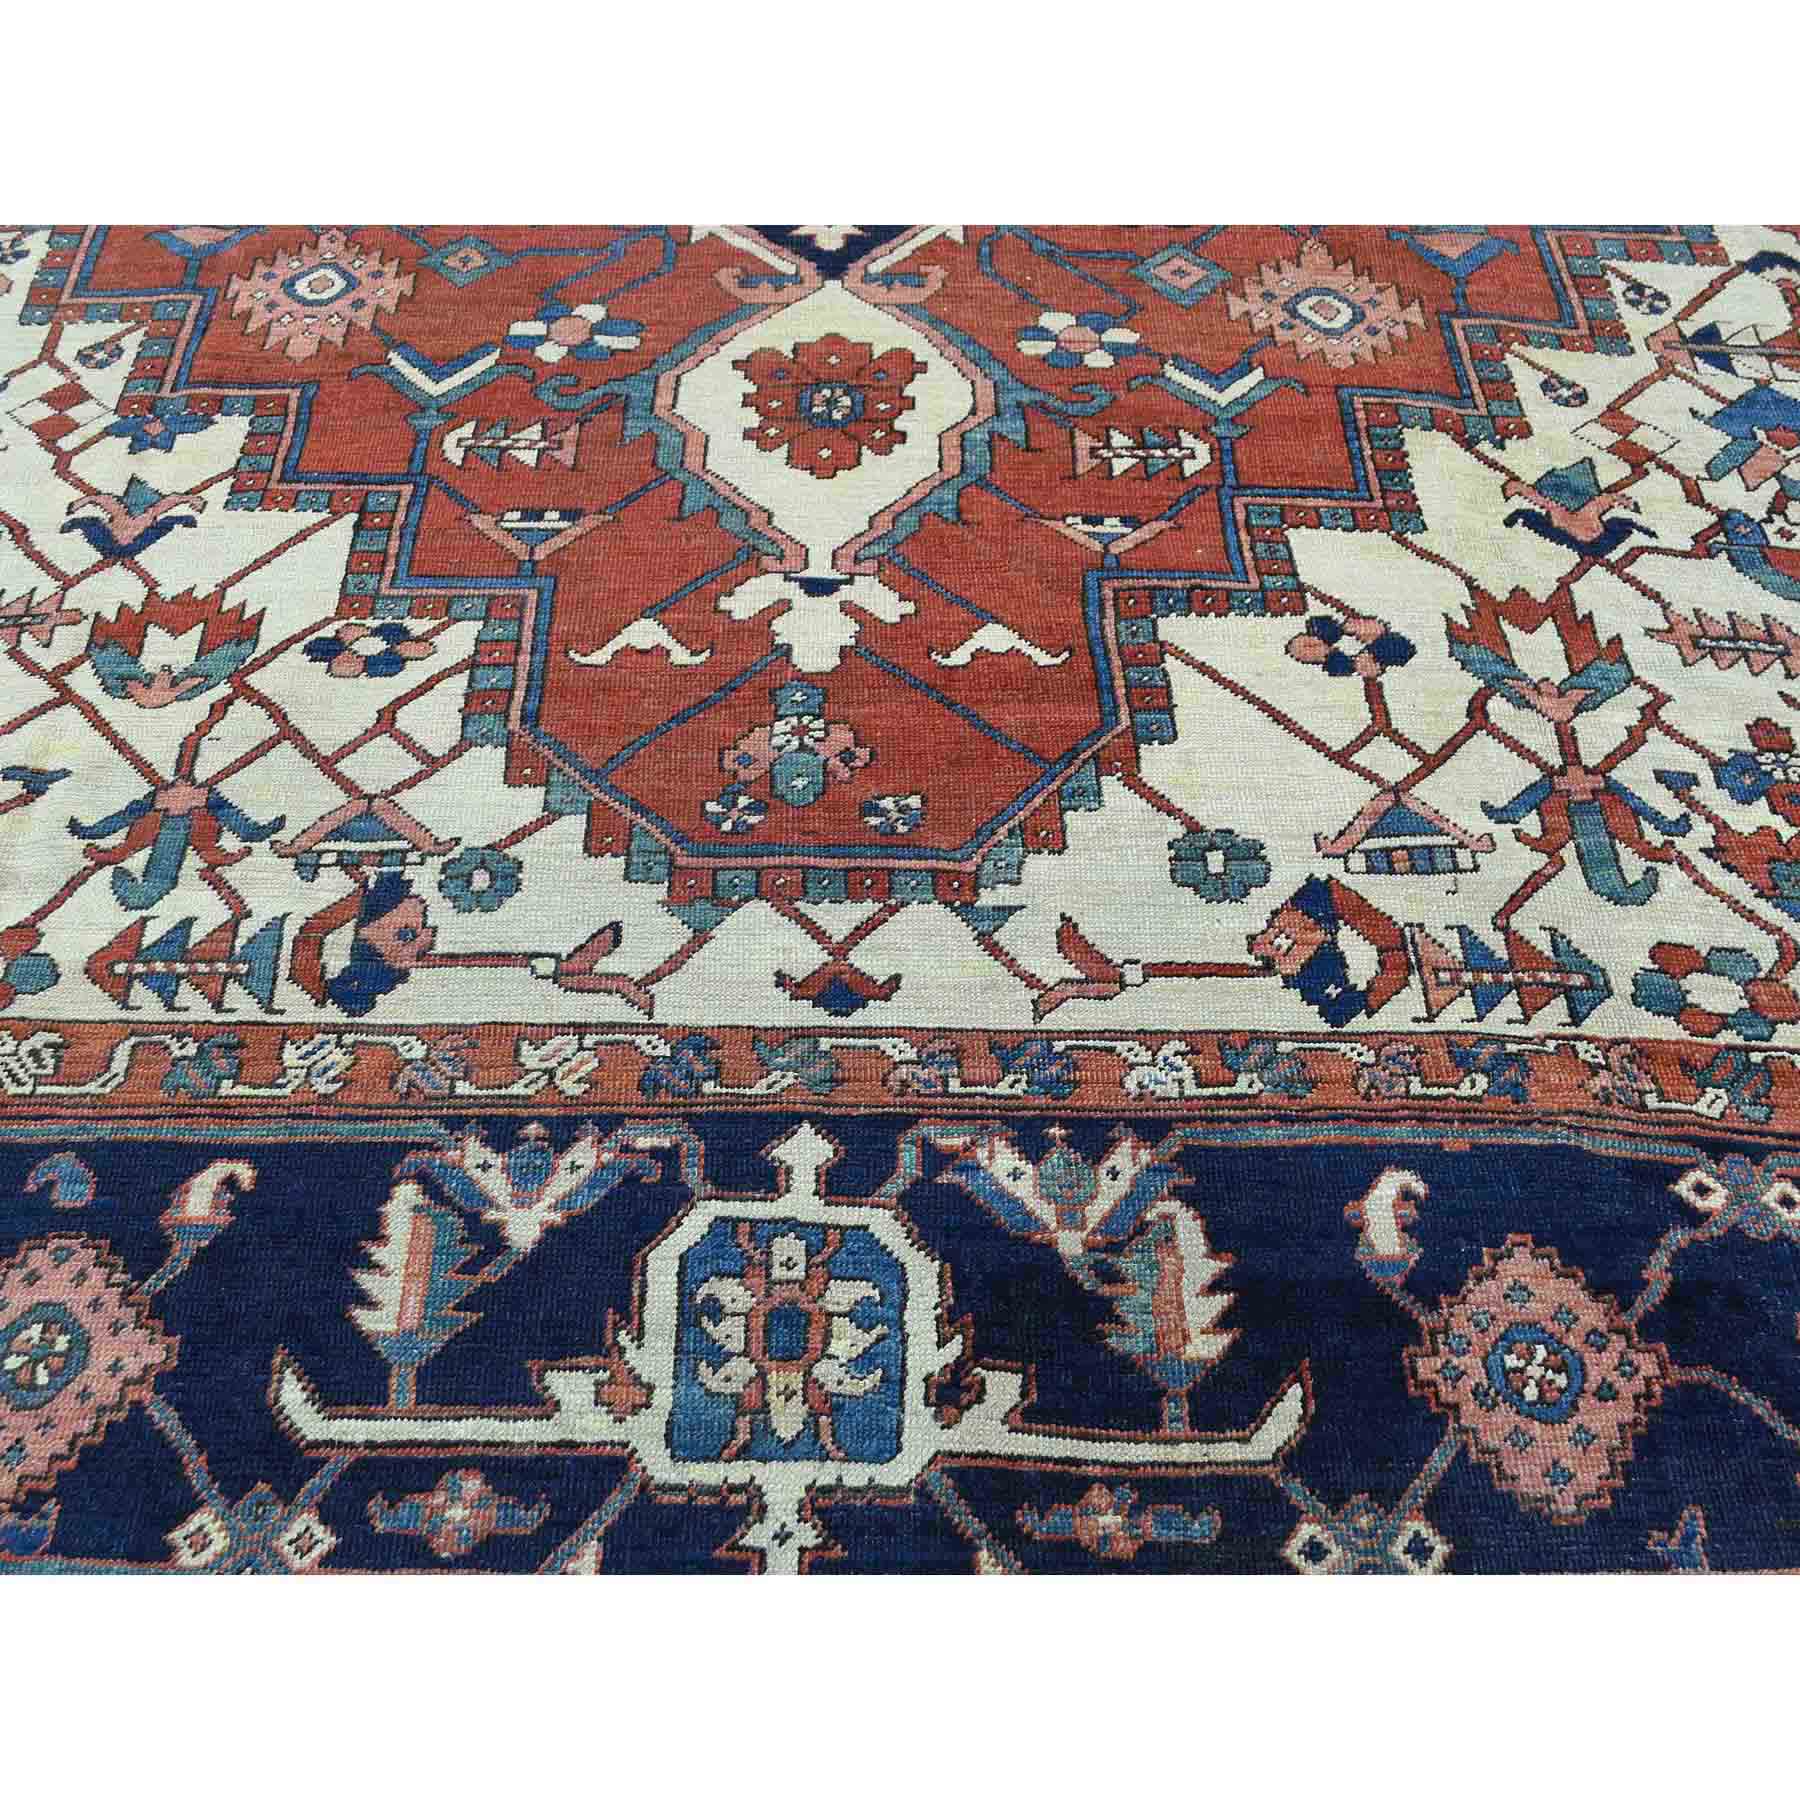 Antique-Hand-Knotted-Rug-177165